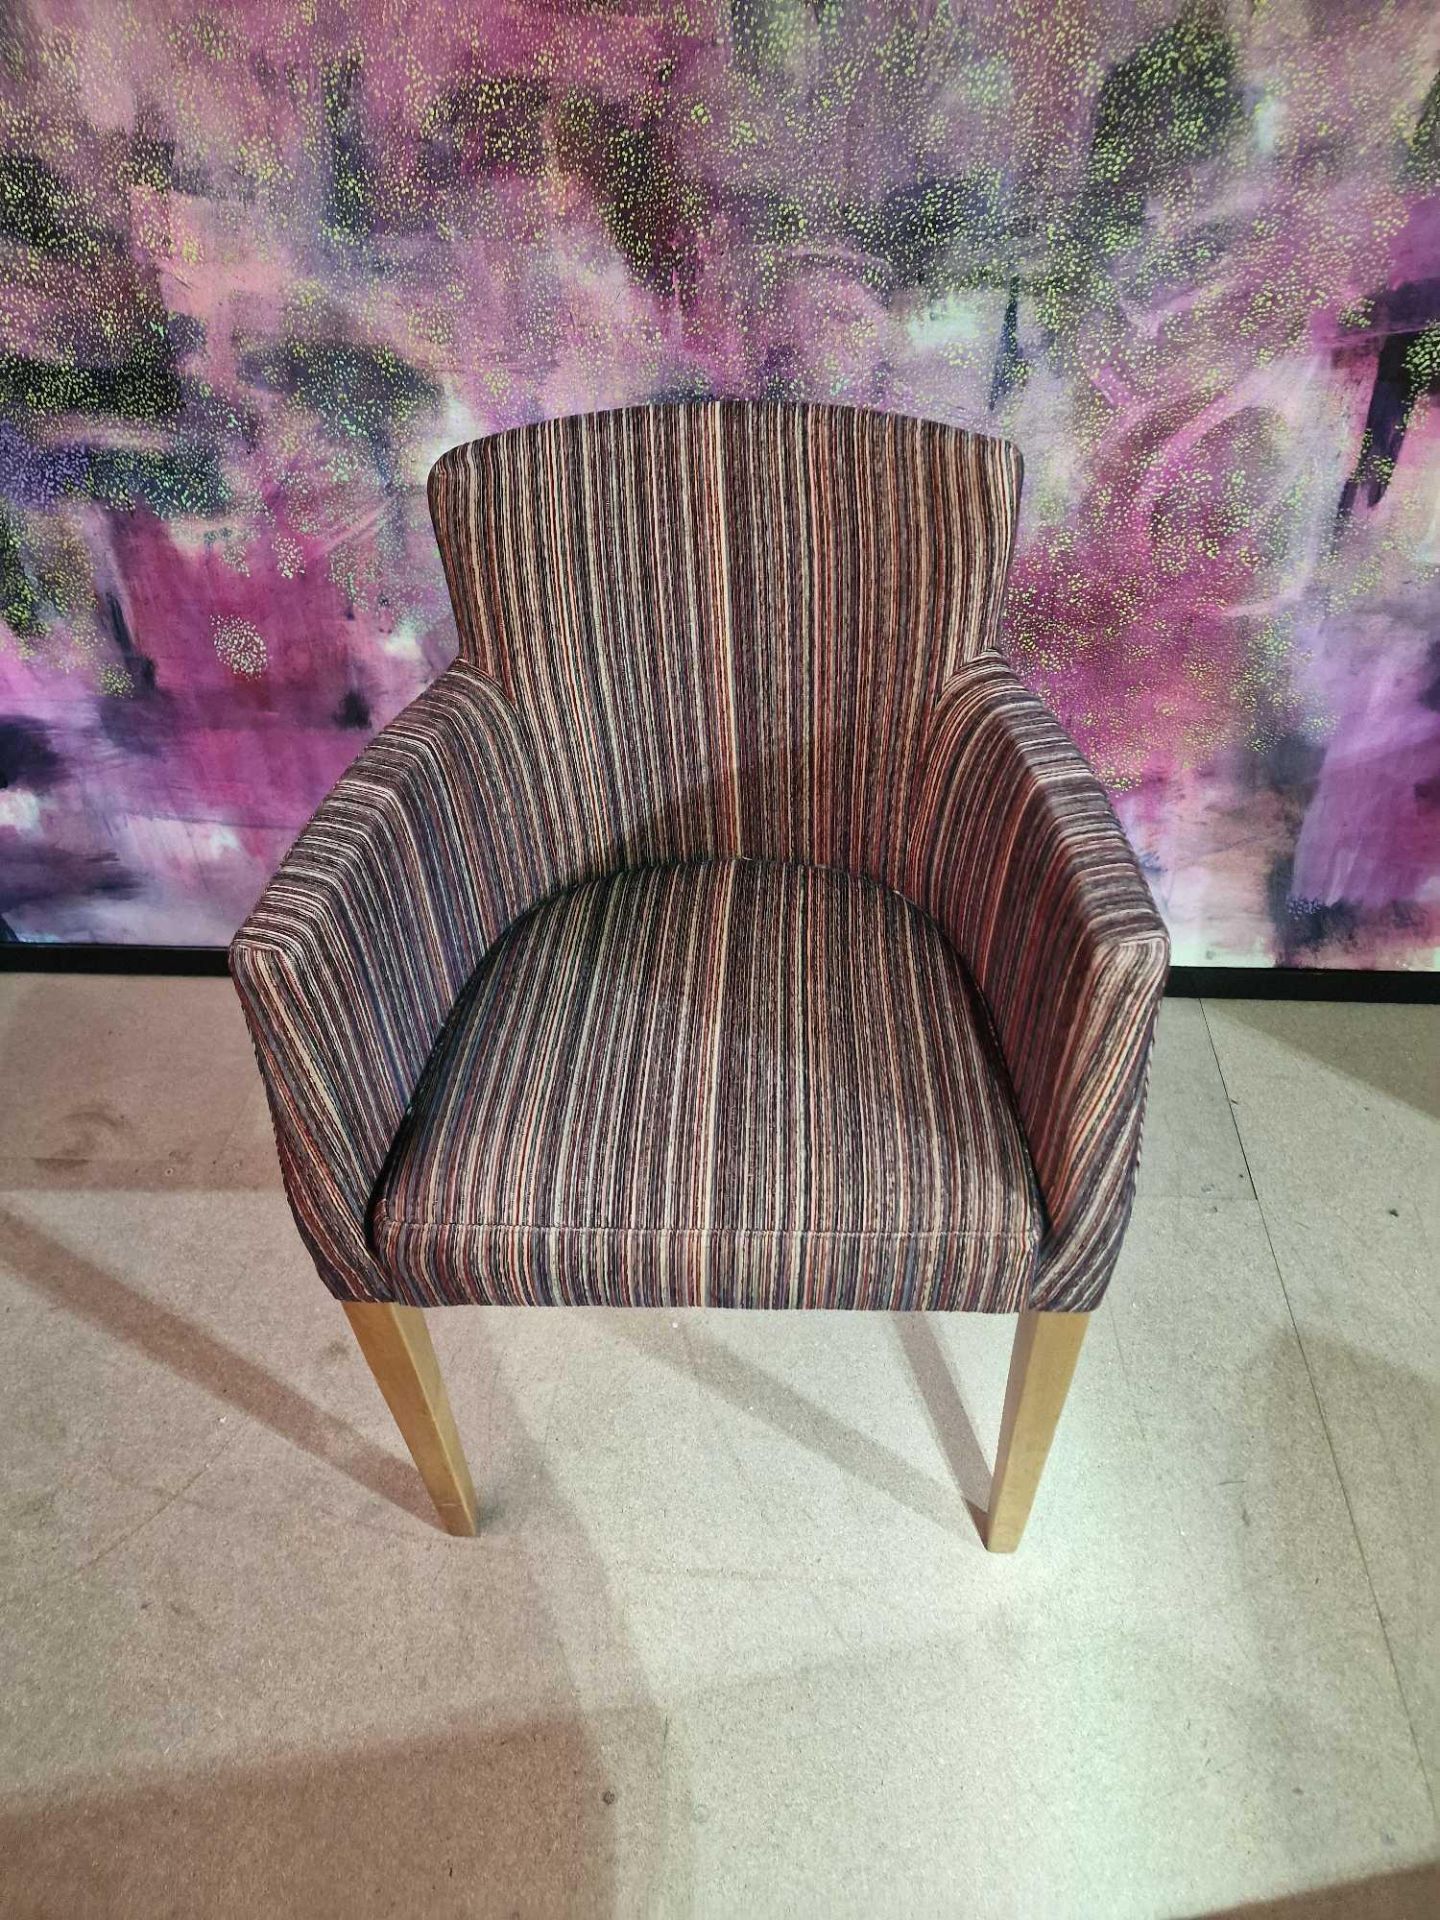 A set of 4 x Contemporary dining chair Upholstered in a modern striped pattern fabric, the high